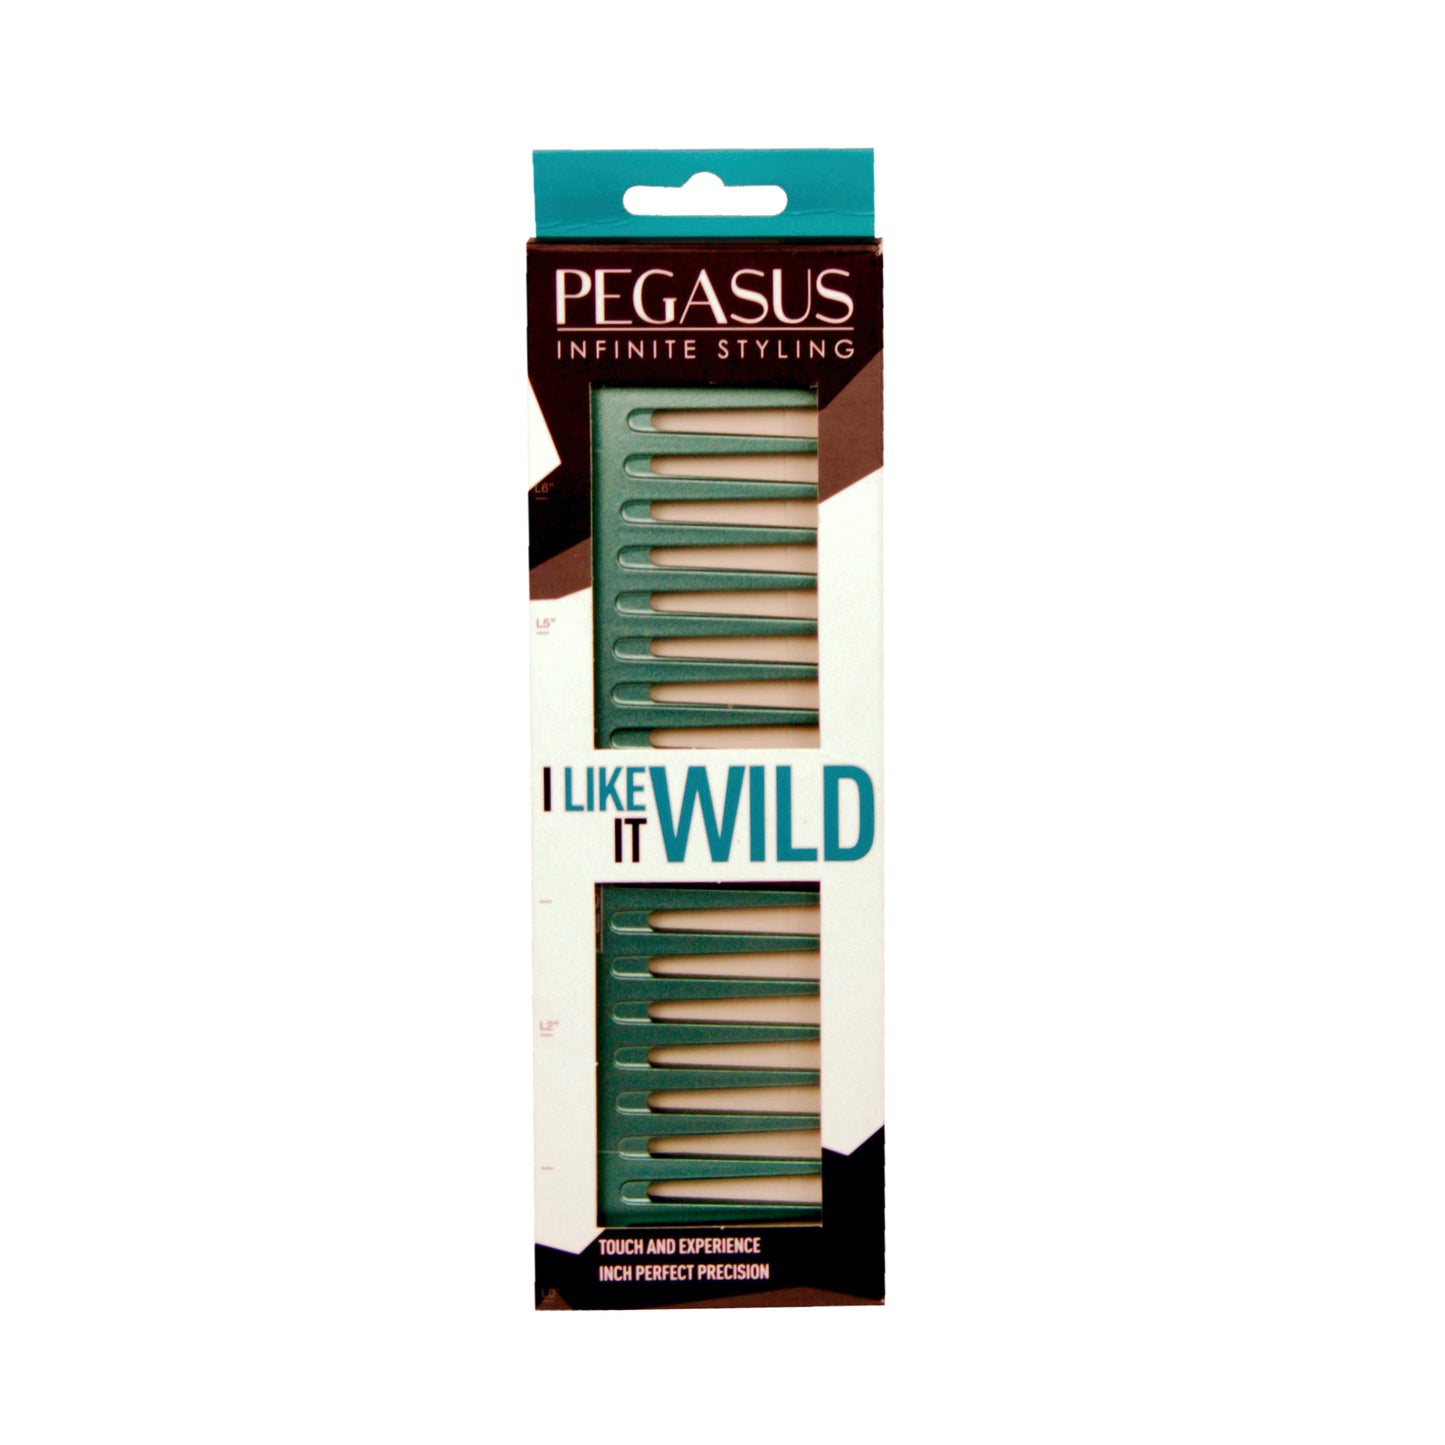 Pegasus MICOLOR 404, 7in Hard Rubber Wide Tooth Tall Styling Comb, Handmade, Seamless, Smooth Edges, Anti Static, Heat and Chemically Resistant, Wet Hair, Everyday Grooming Comb | Peines de goma dura - Green